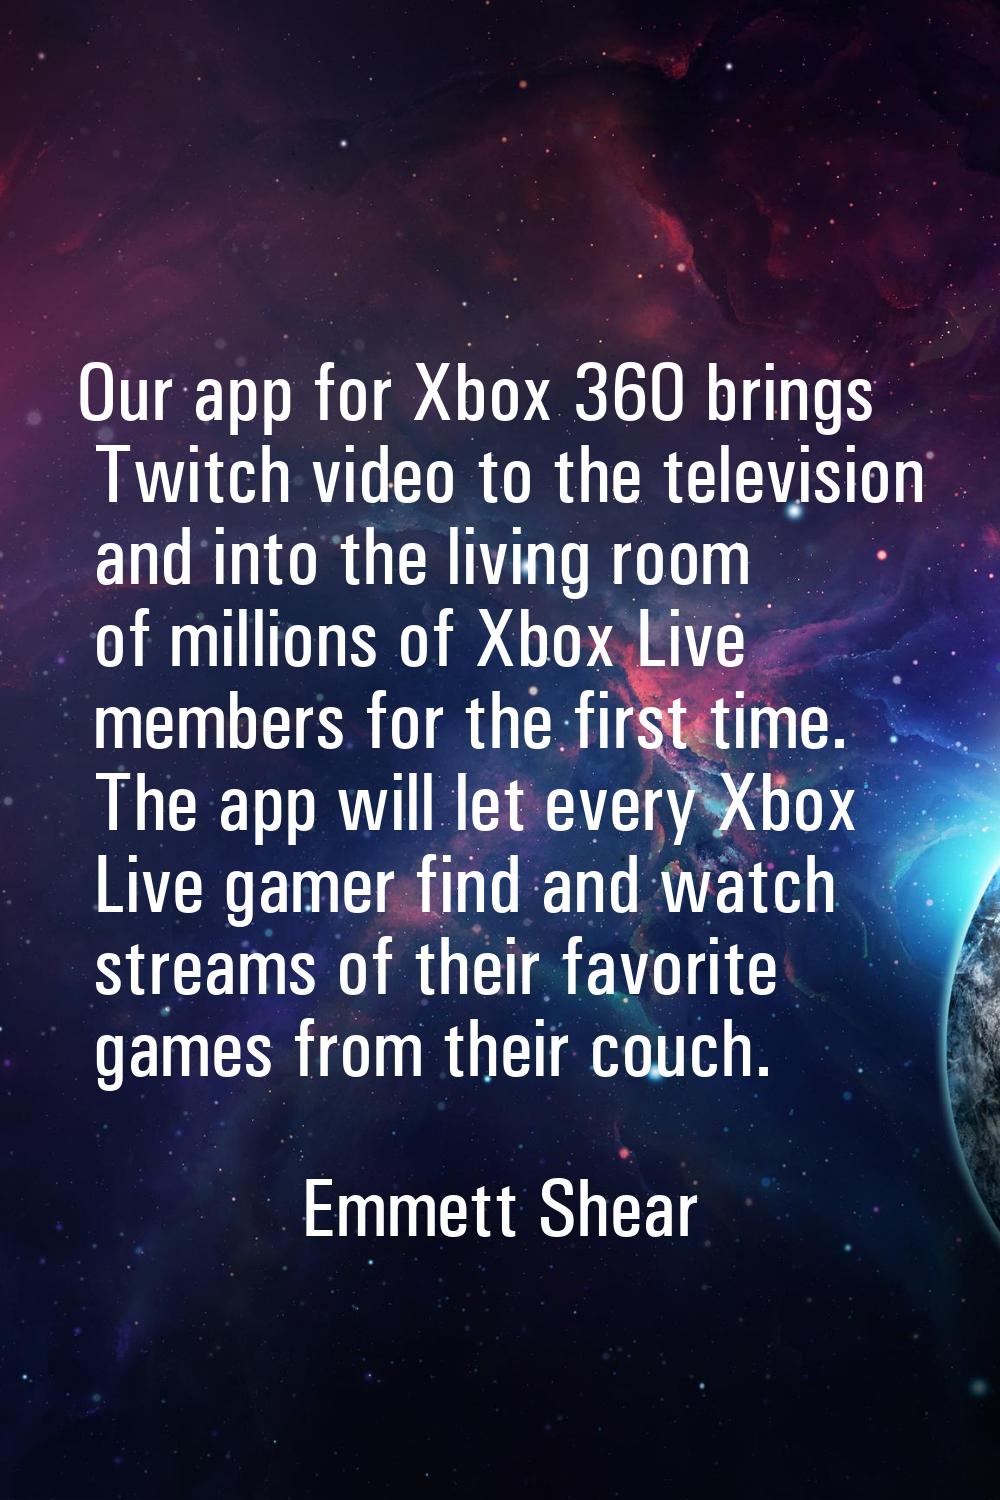 Our app for Xbox 360 brings Twitch video to the television and into the living room of millions of 